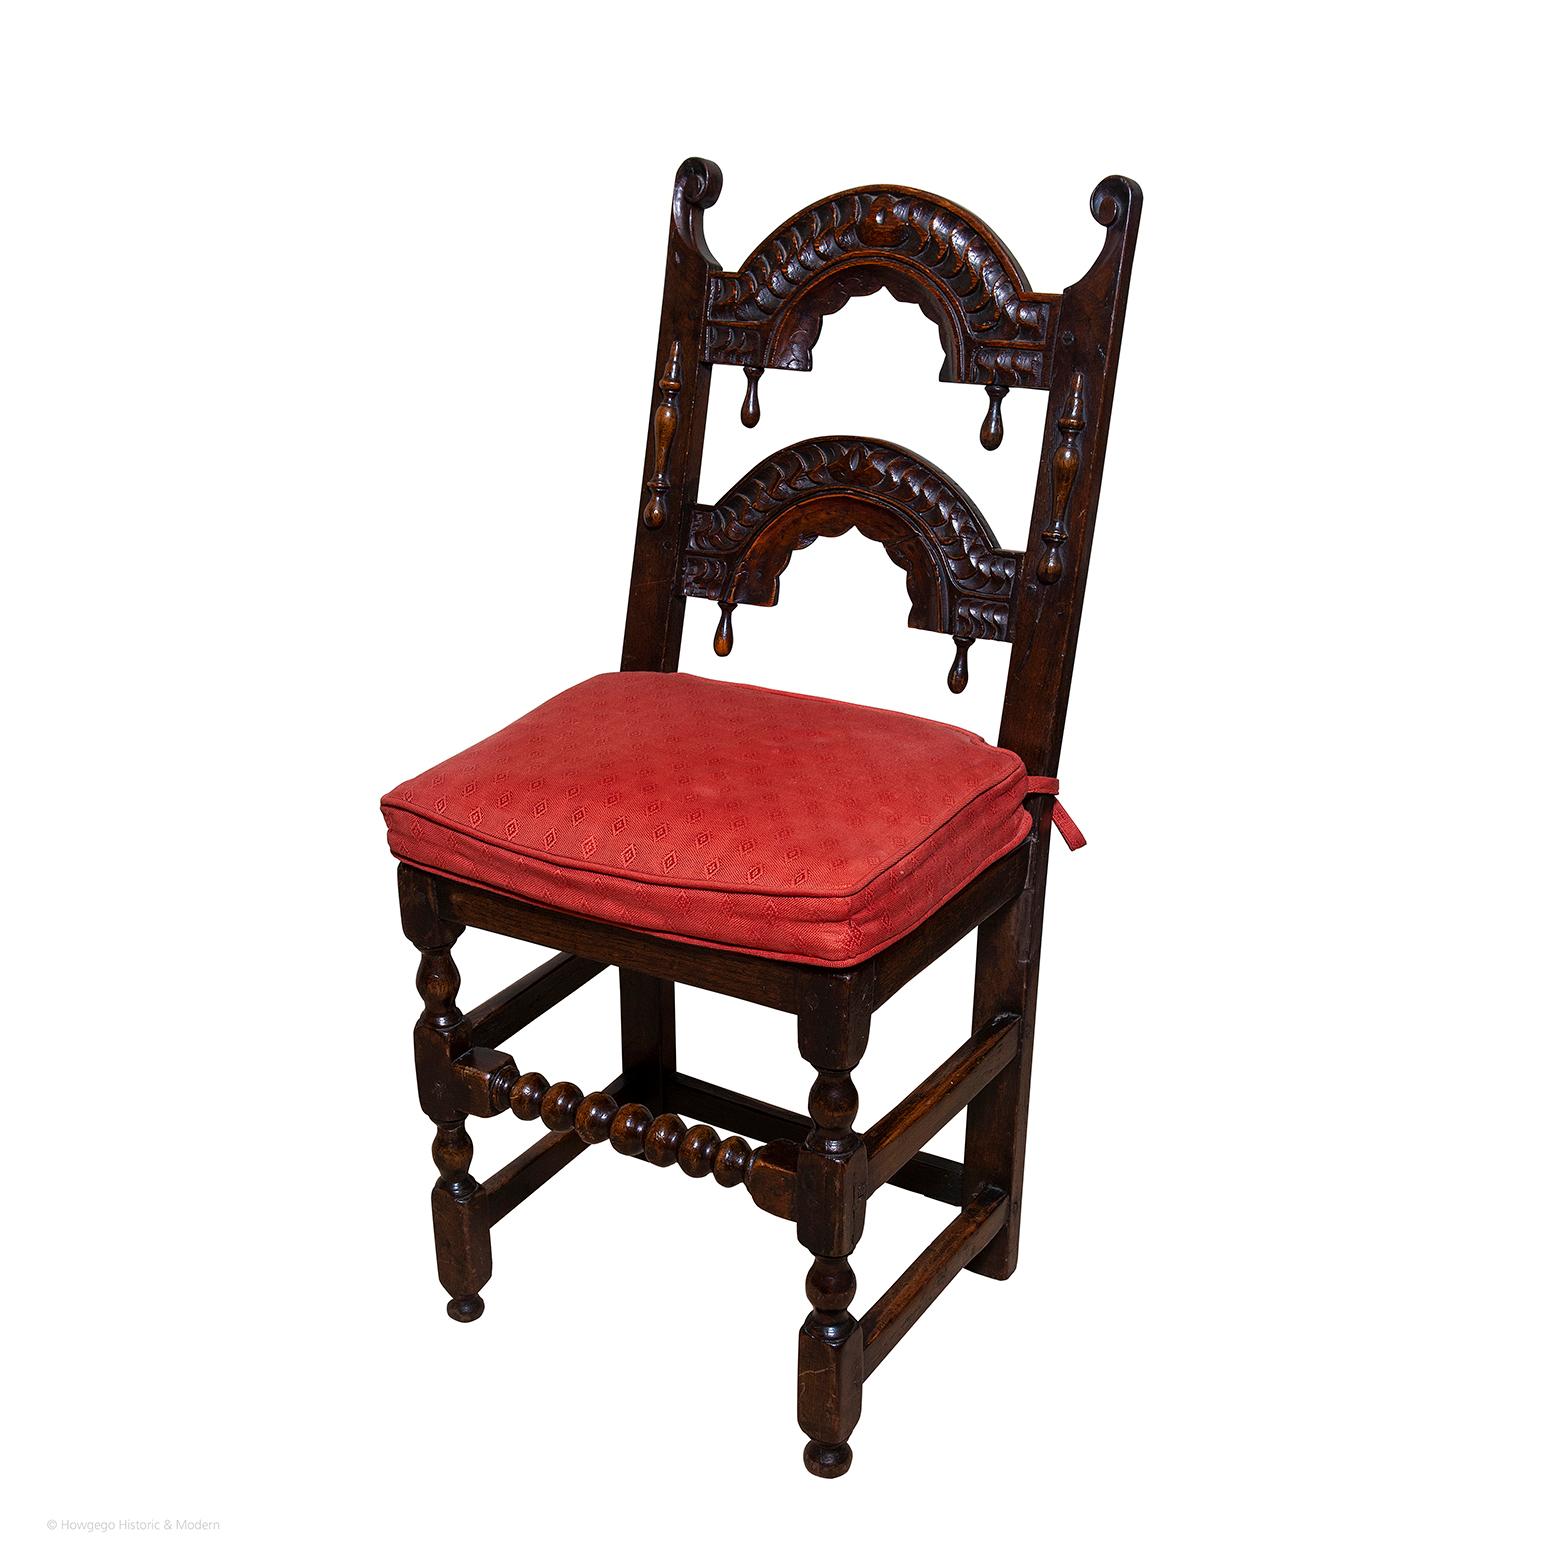 - Striking set of architecturally inspired chairs which are very decorative
- Sturdy and suitable for daily use
- Rich and lustrous patina
- I am open to splitting the set as it is an odd number

A set of 5 antiquarian Jacobean-style oak side